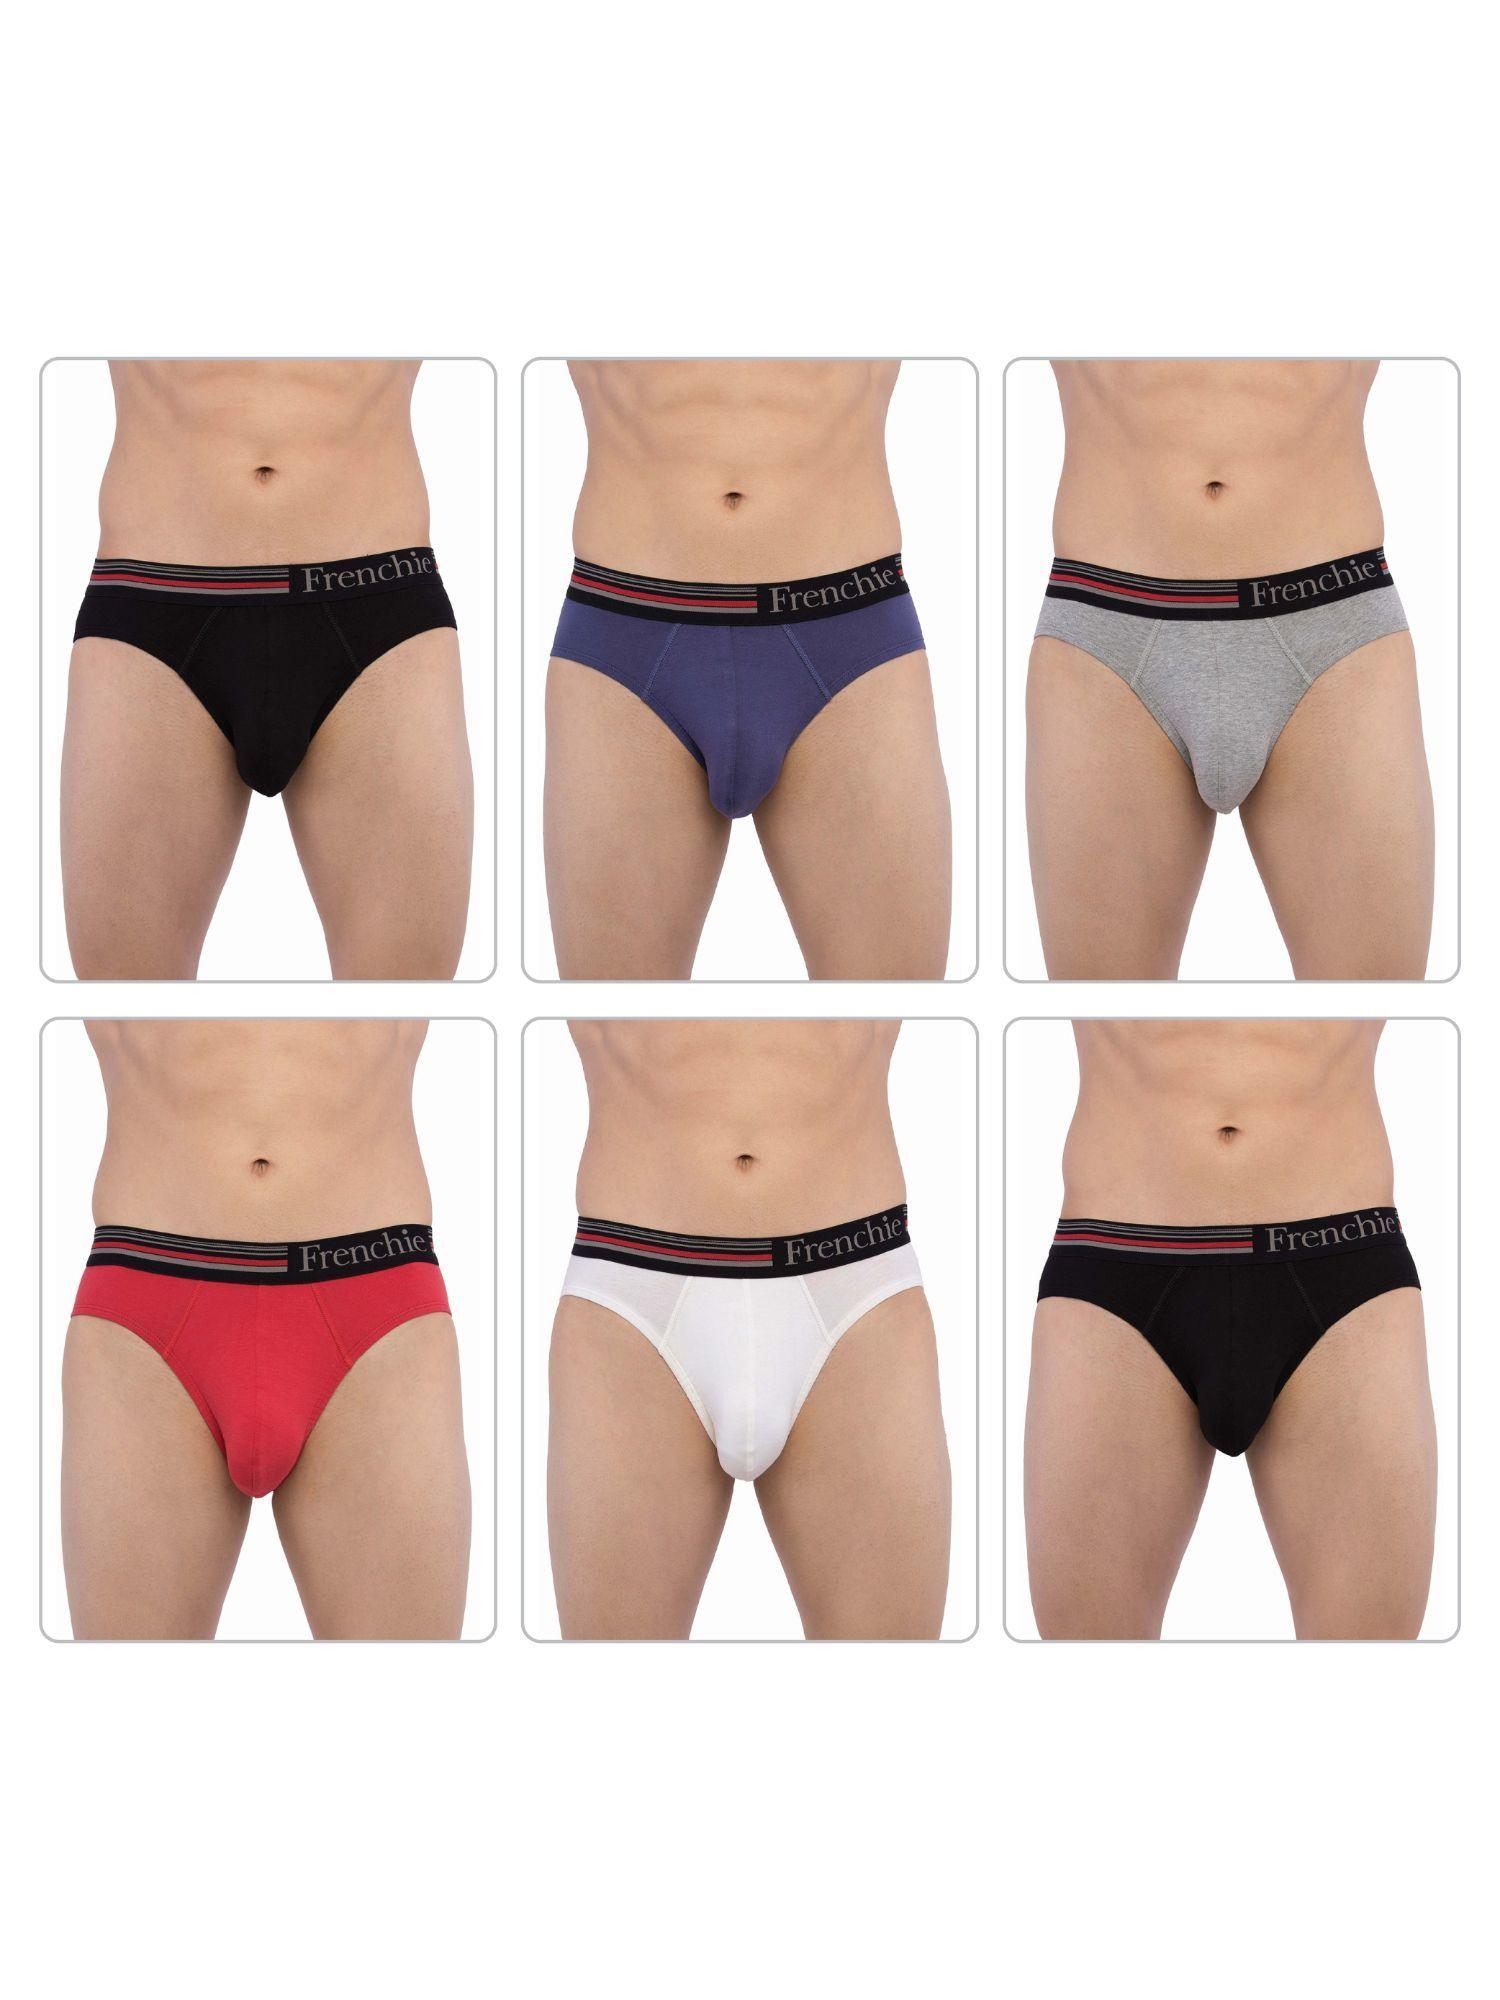 casuals-4000-mens-cotton-briefs-assorted-colours-(pack-of-6)